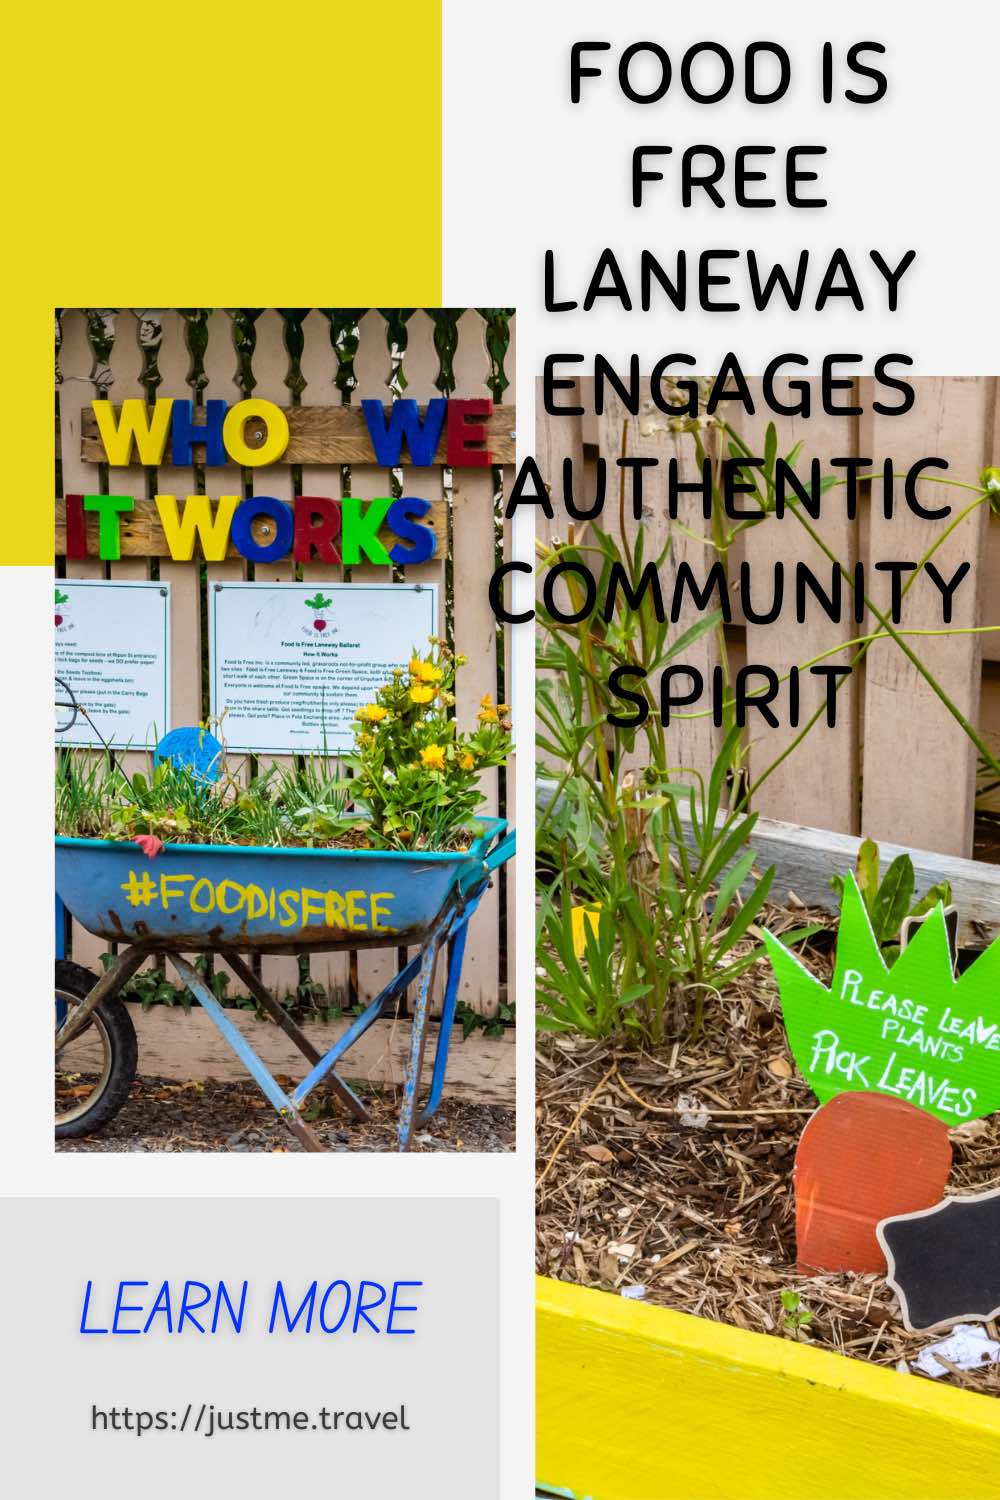 A picture with two photos. One photo is of a blue wheelbarrow with plants in it. The second photo is of a yellow wooden box planted with herbs. Learn more from JustMe.Travel about Food Is Free Laneway supporting community.